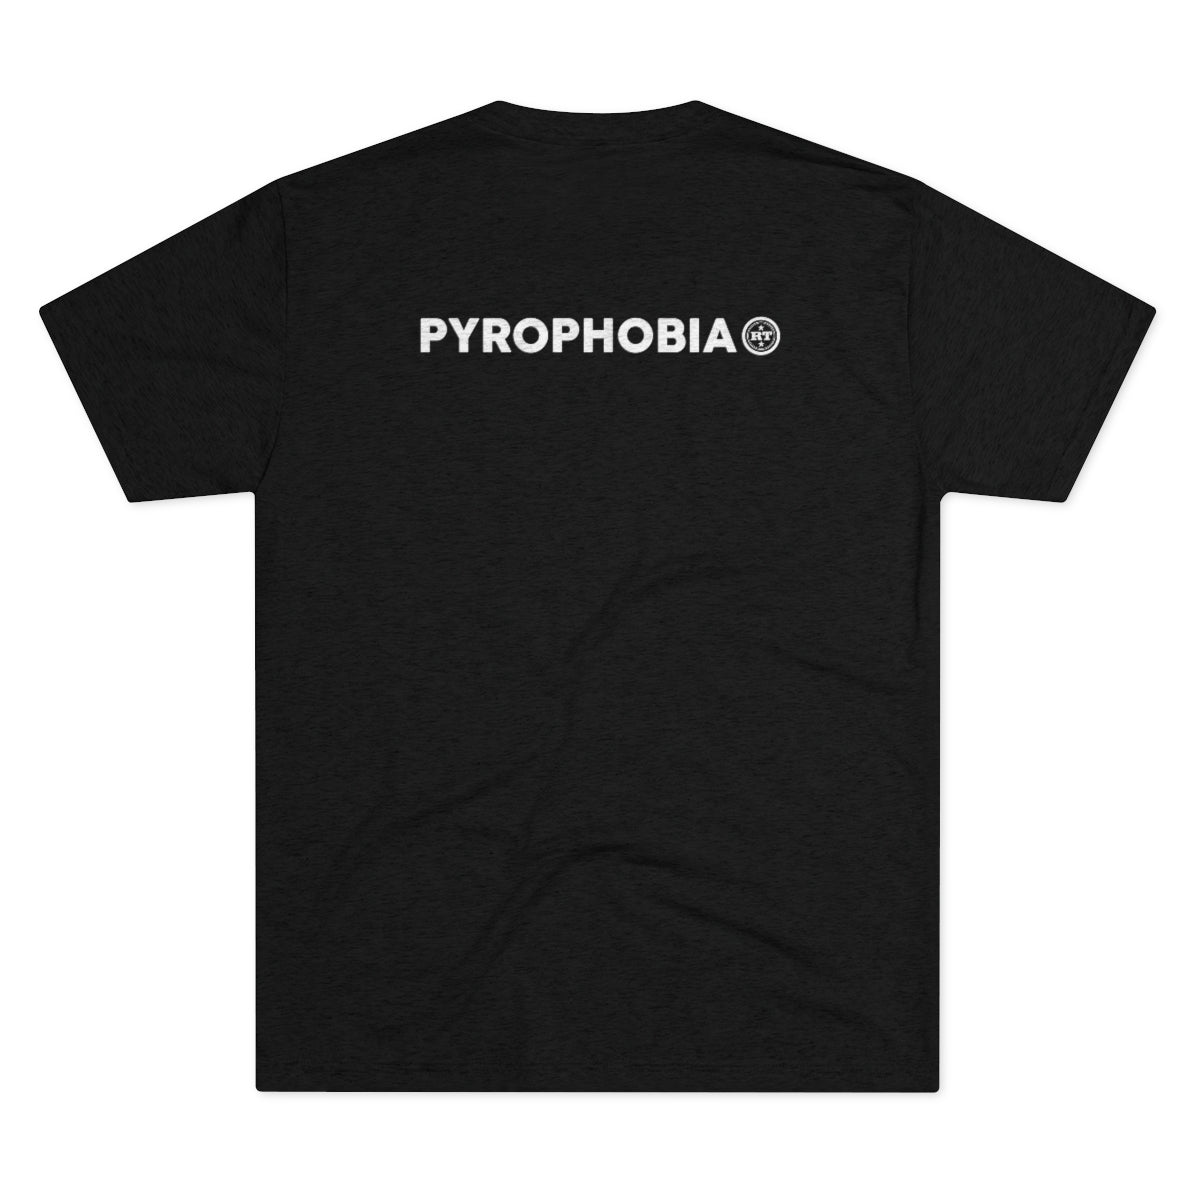 Special Collection – Phobia: Pyrophobia – Unisex Tri-Blend Crew Tee